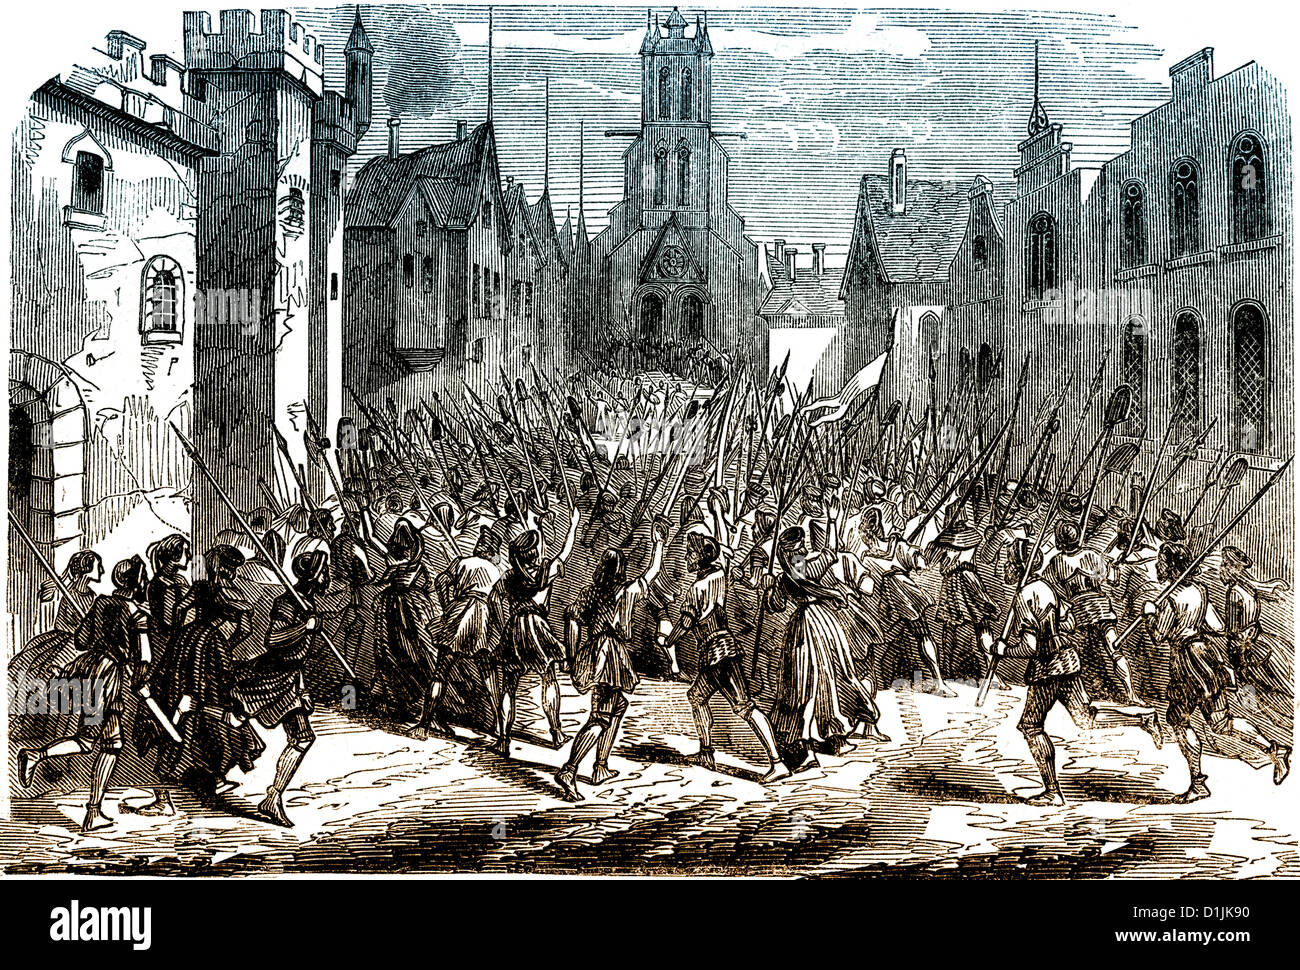 scene from the history of France, a revolt in a Frankish town in the 12th century, Stock Photo